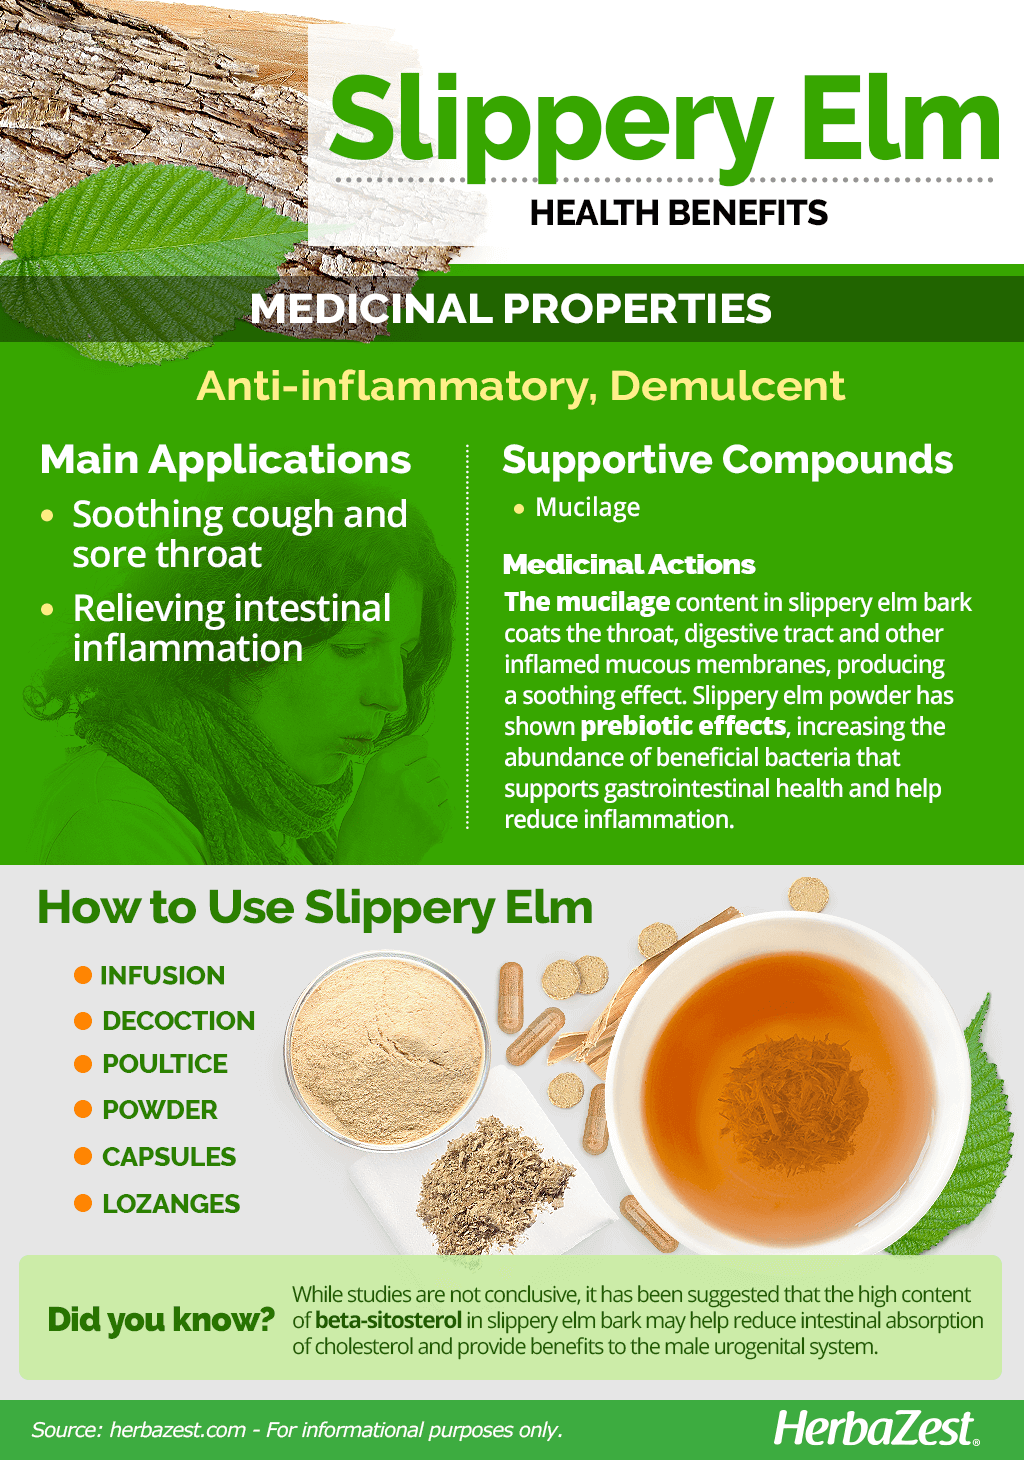 All About Slippery Elm